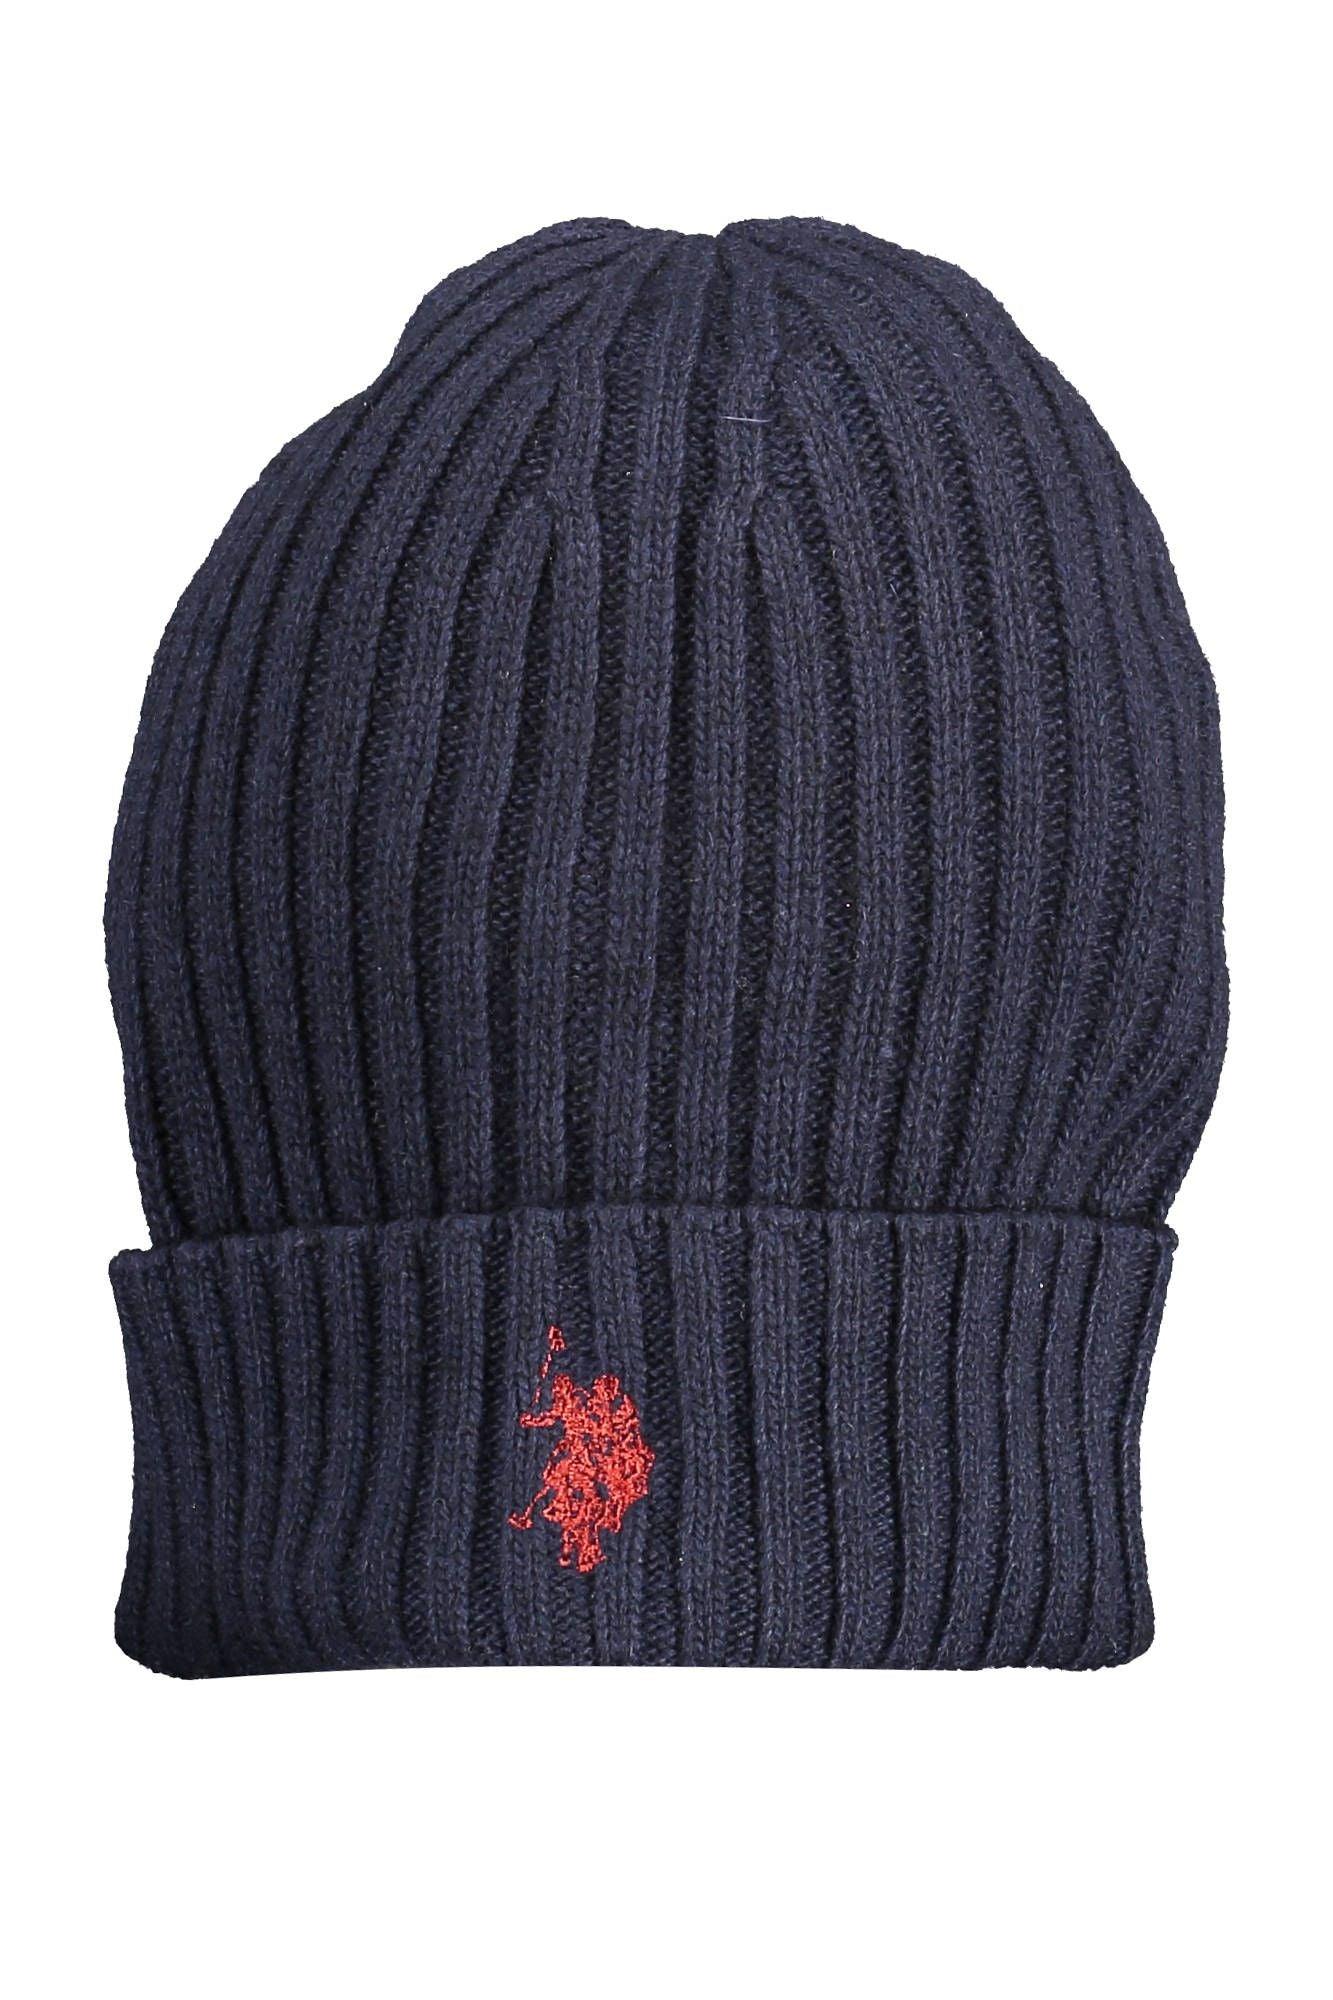 U.S. POLO ASSN. Embroidered Logo Wool Cap in Blue - PER.FASHION